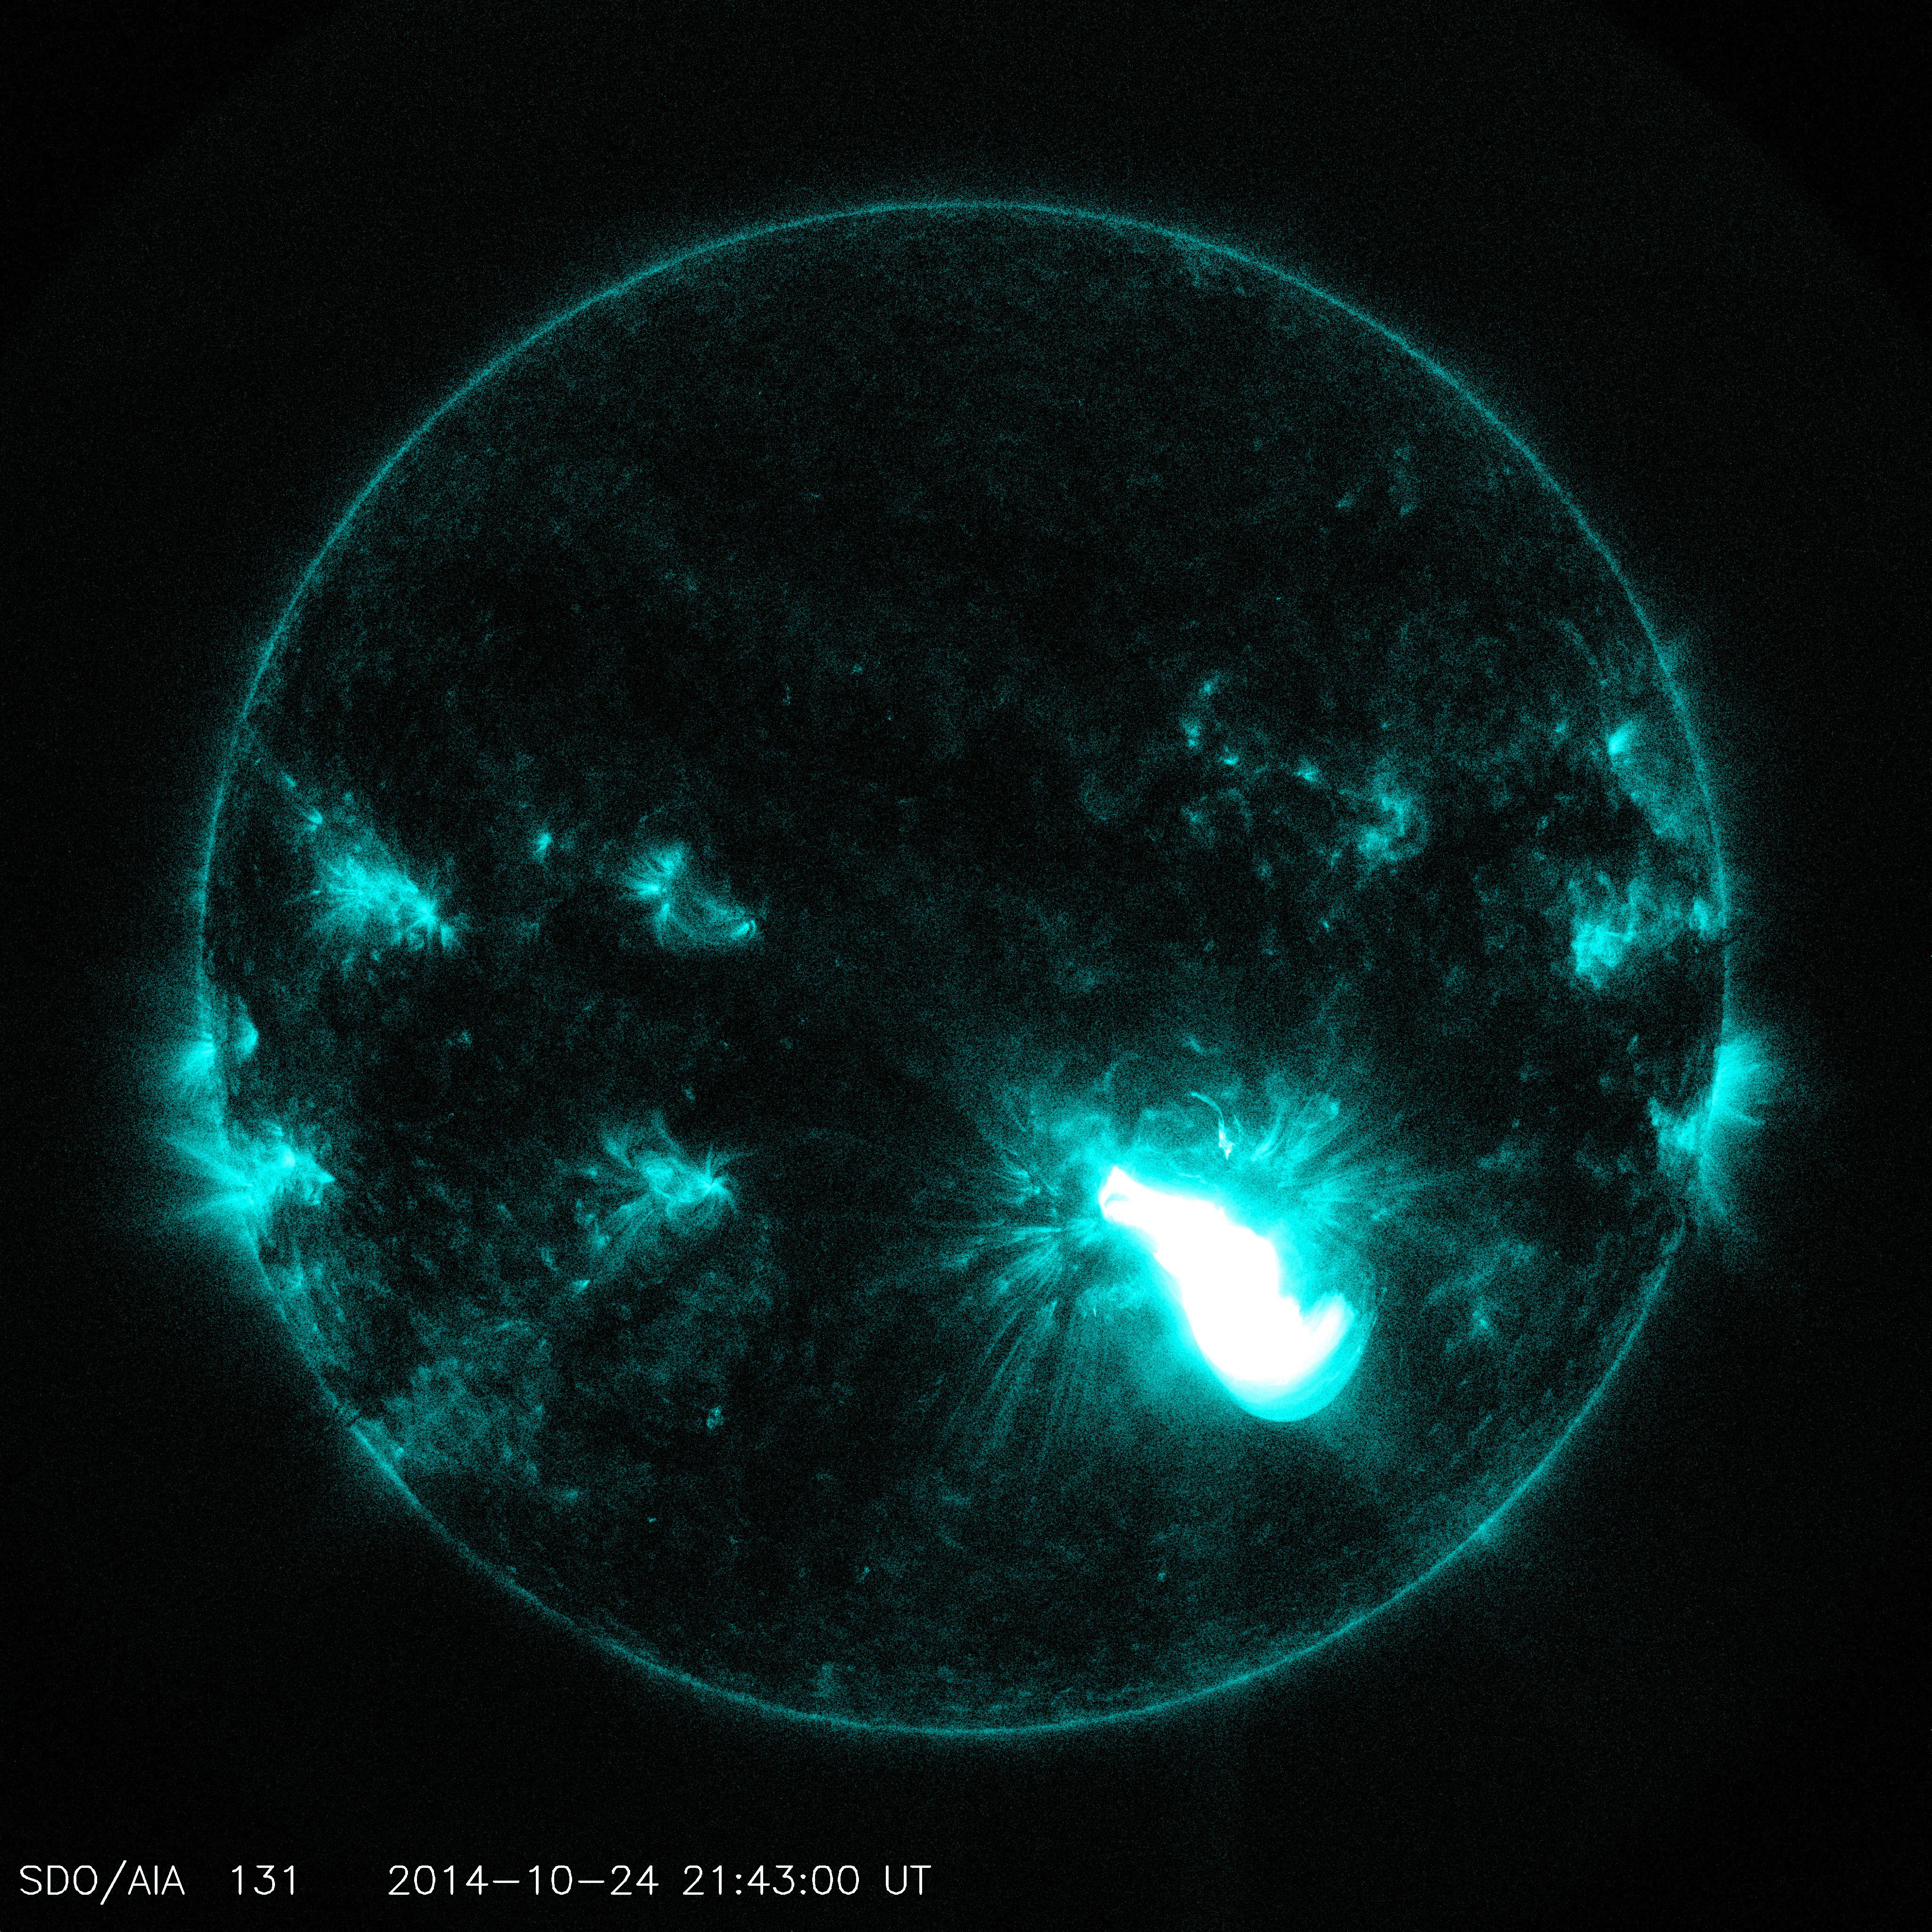 SDO AIA image of the X3.1 flare in 131 angstrom light from 21:43 UT on October 24, 2014.Credit:NASA/SDO